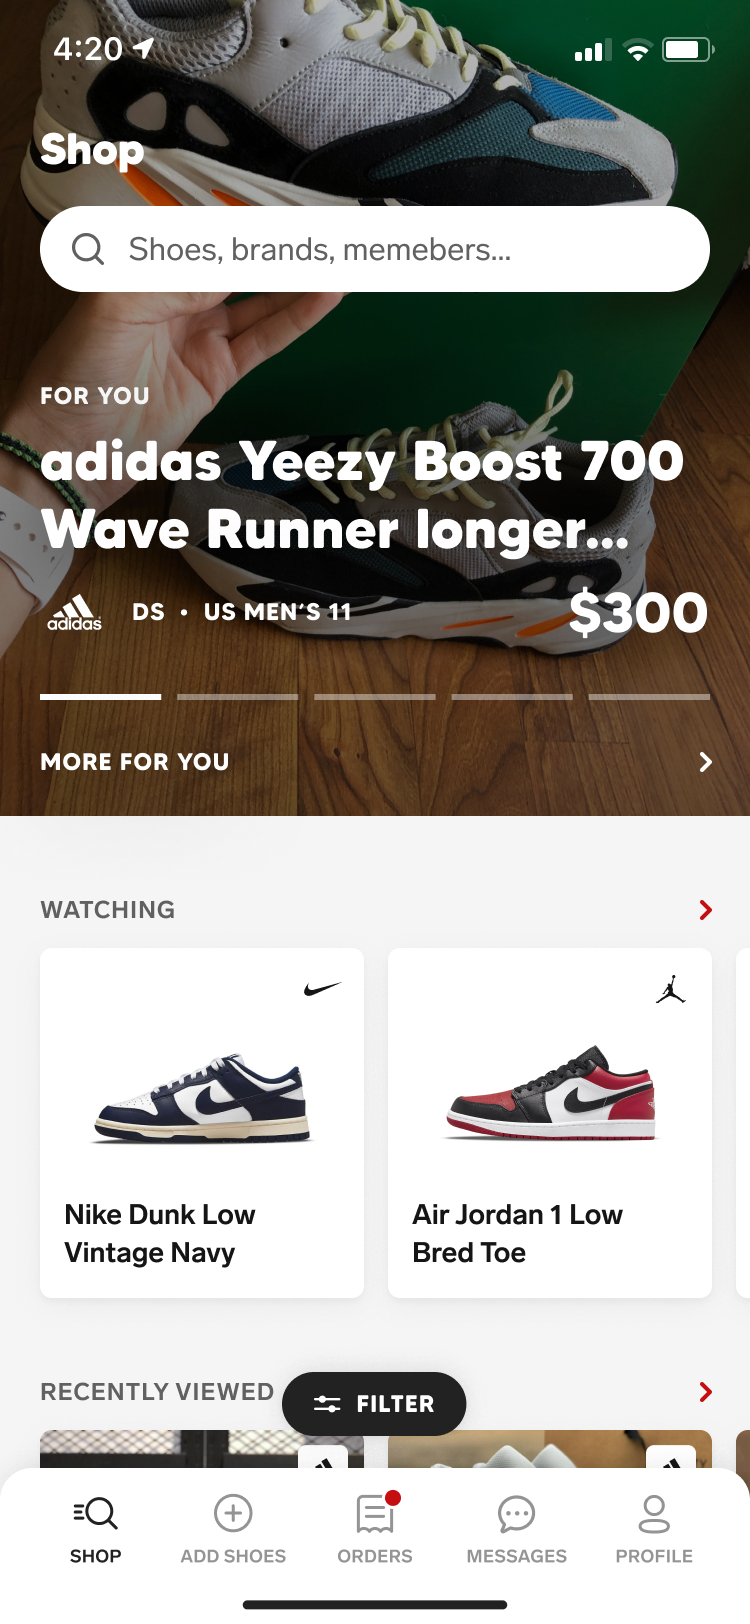 Shop screenshot of the Collect mobile app